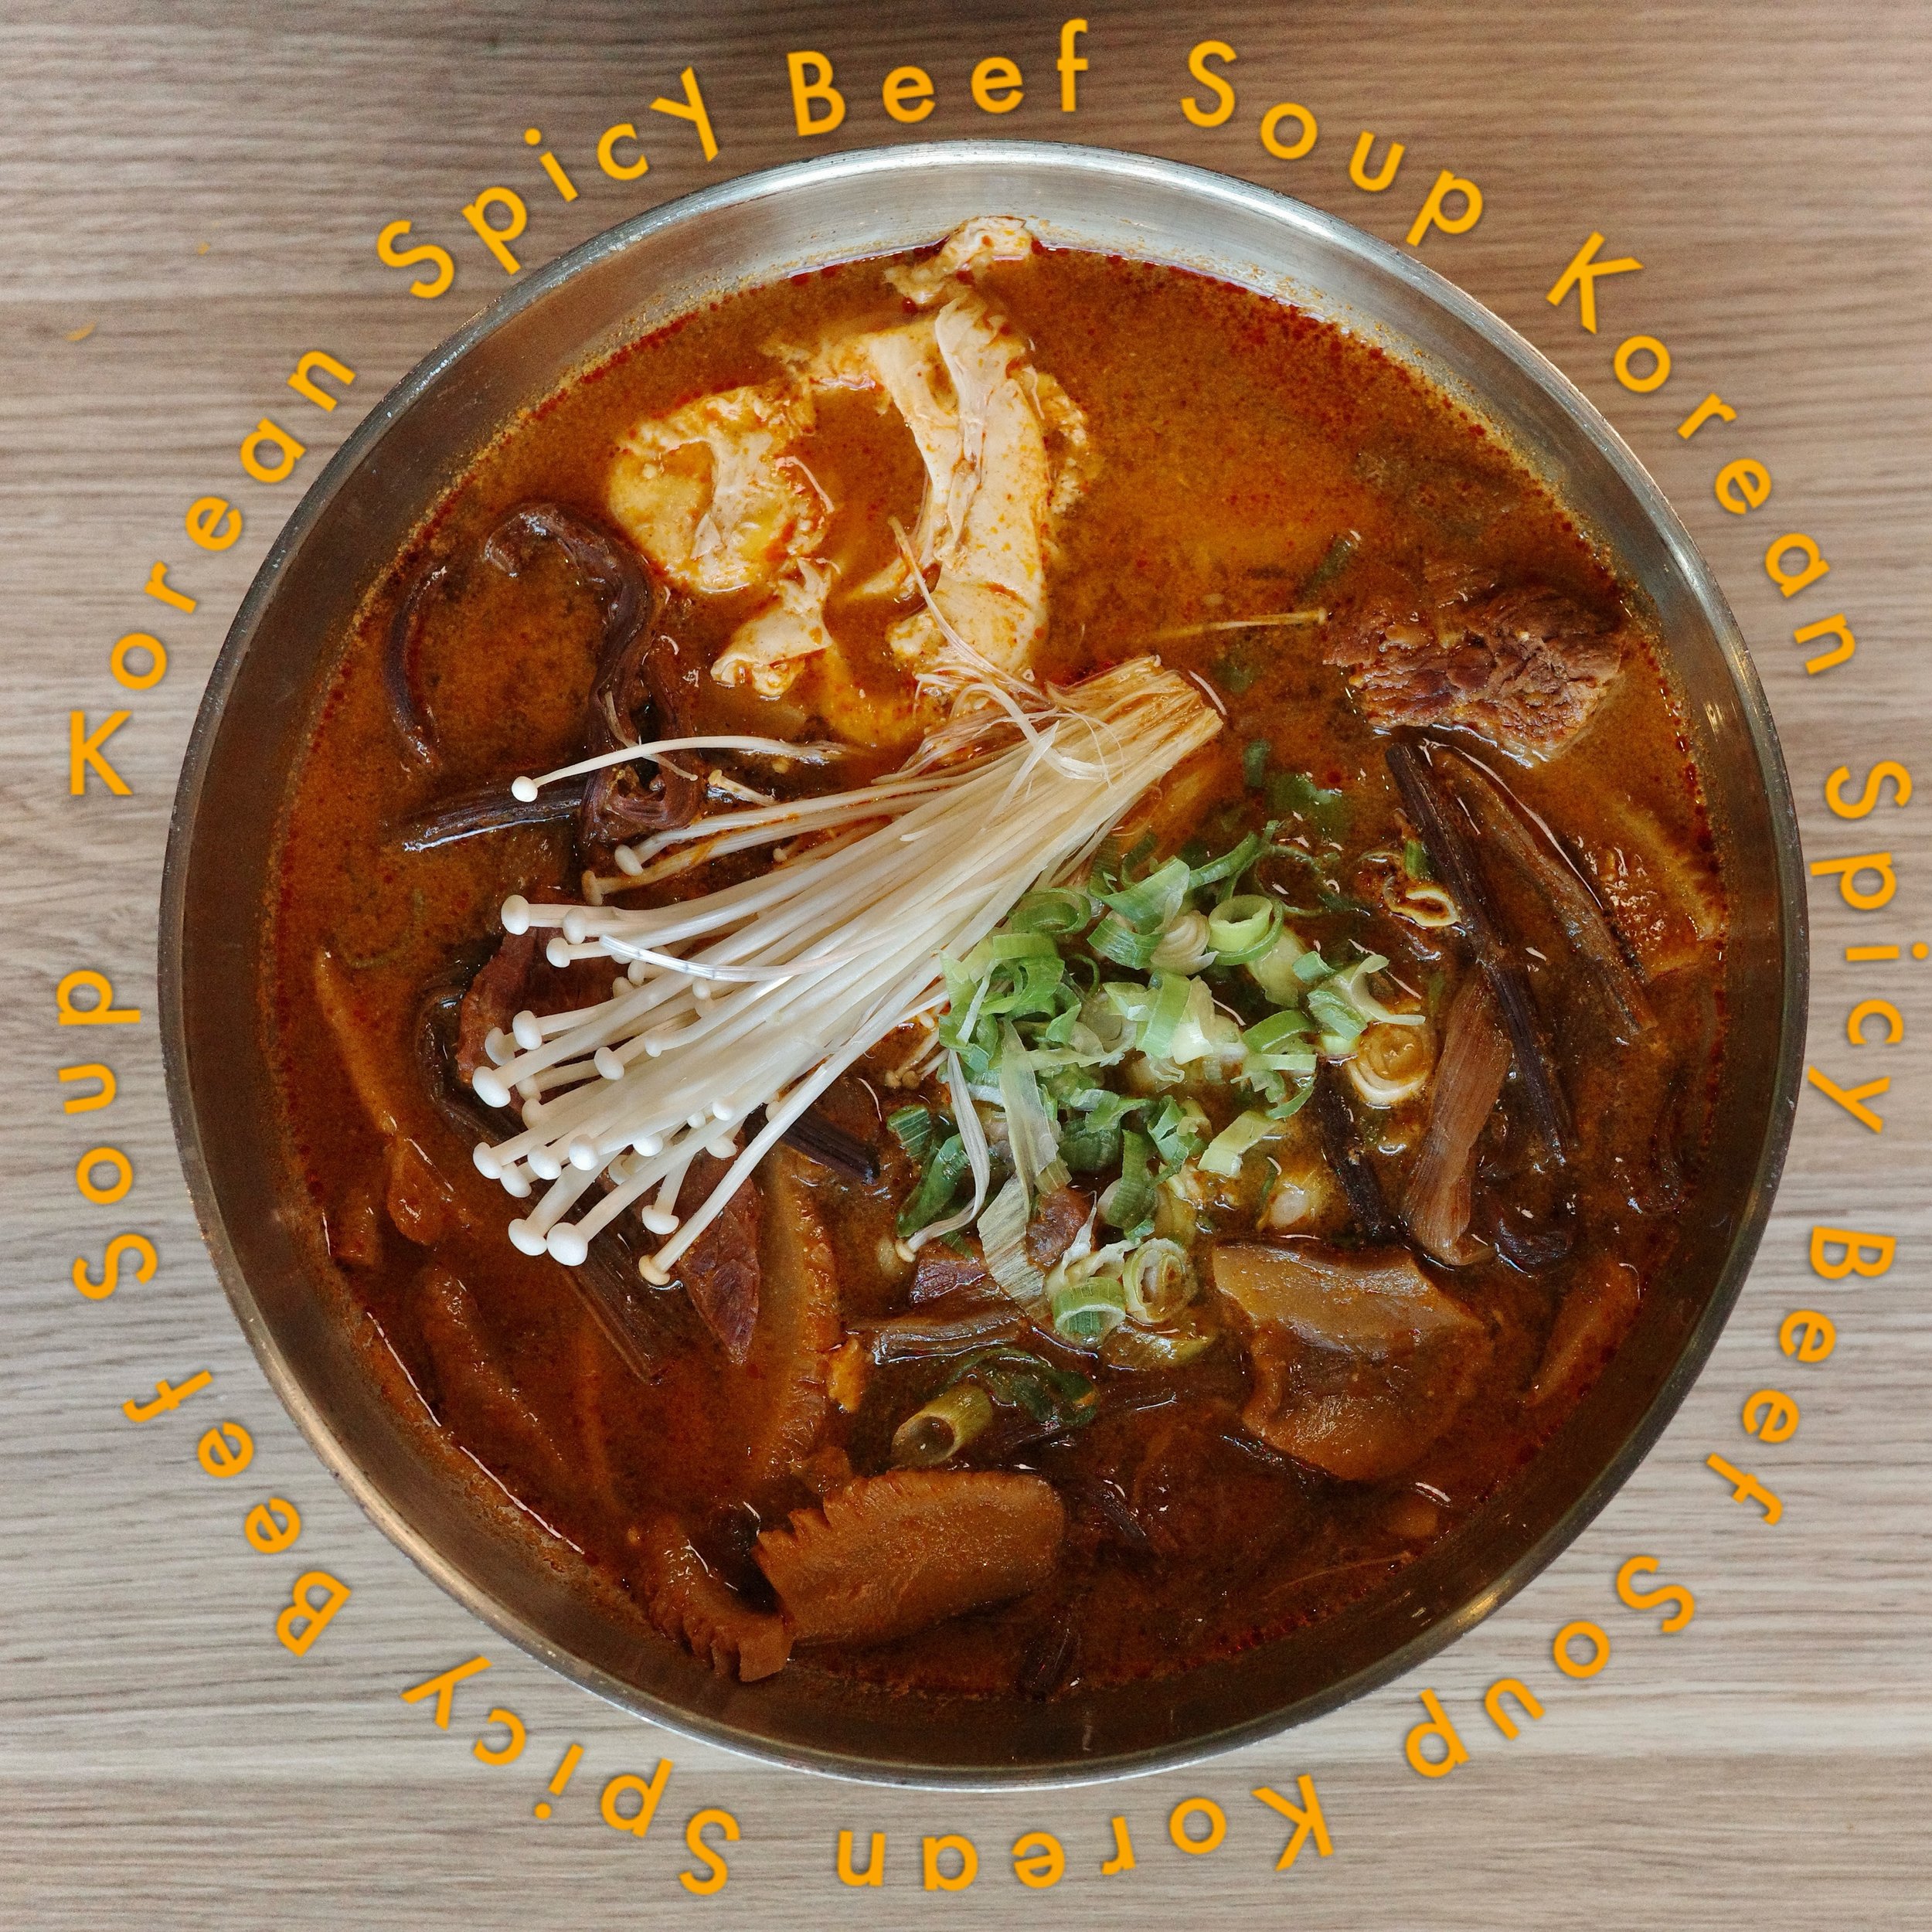 Feeling a bit chilly today? Warm up with our delicious Korean spicy beef soup! It&rsquo;s the perfect comfort food for a rainy day. 🌧️💪🍲

⏰ Mon-Fri 4:30pm-12:00am (last order 10:30pm)
 Sat-Sun 11:30am-12:00am 
(break 2:30-4:30, last order 10:30pm)